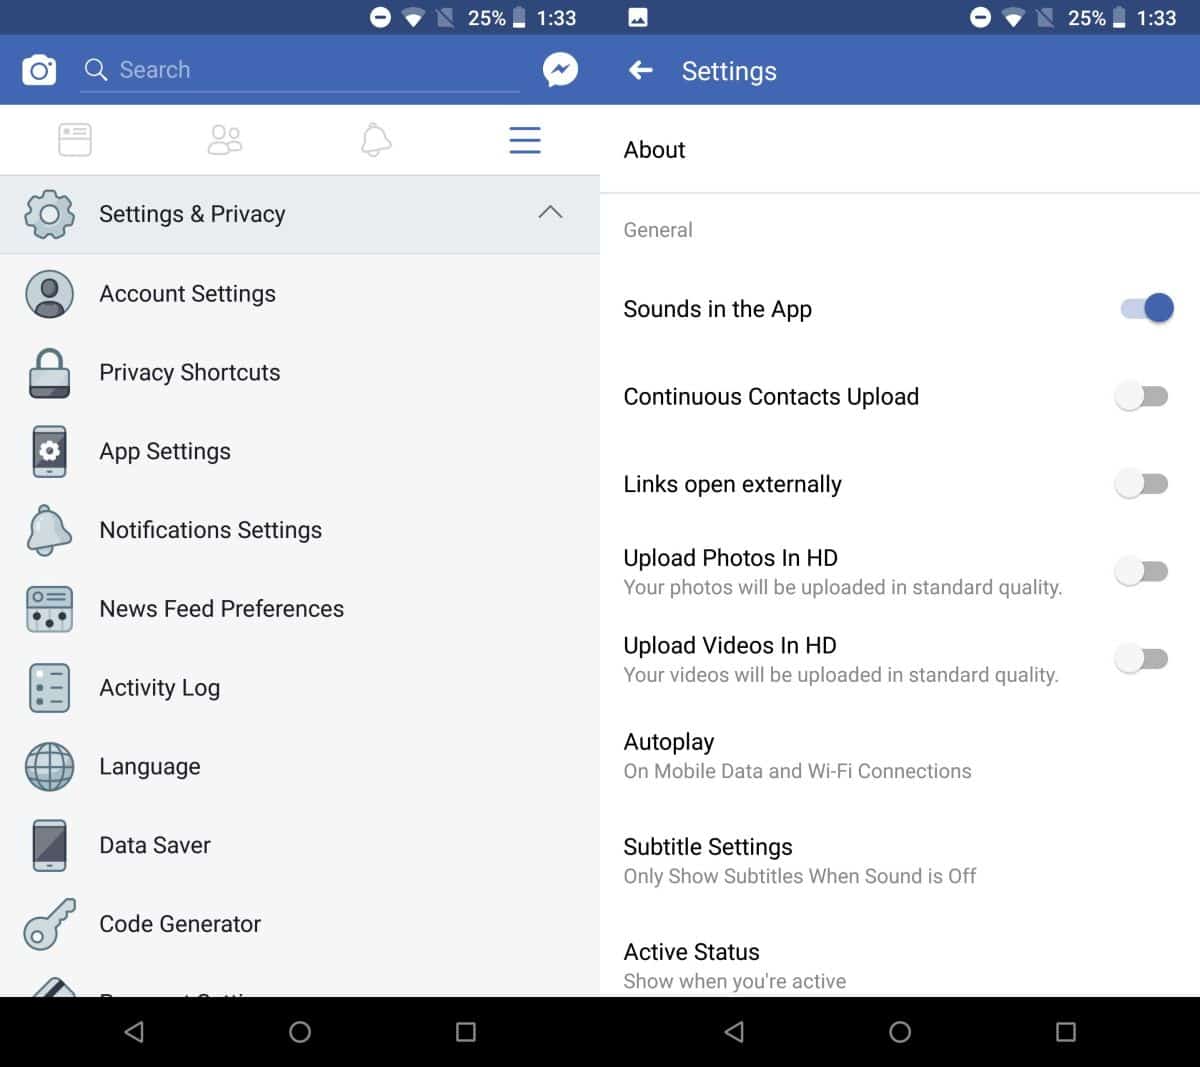 How To Upload HD Photos To Facebook From Your Phone